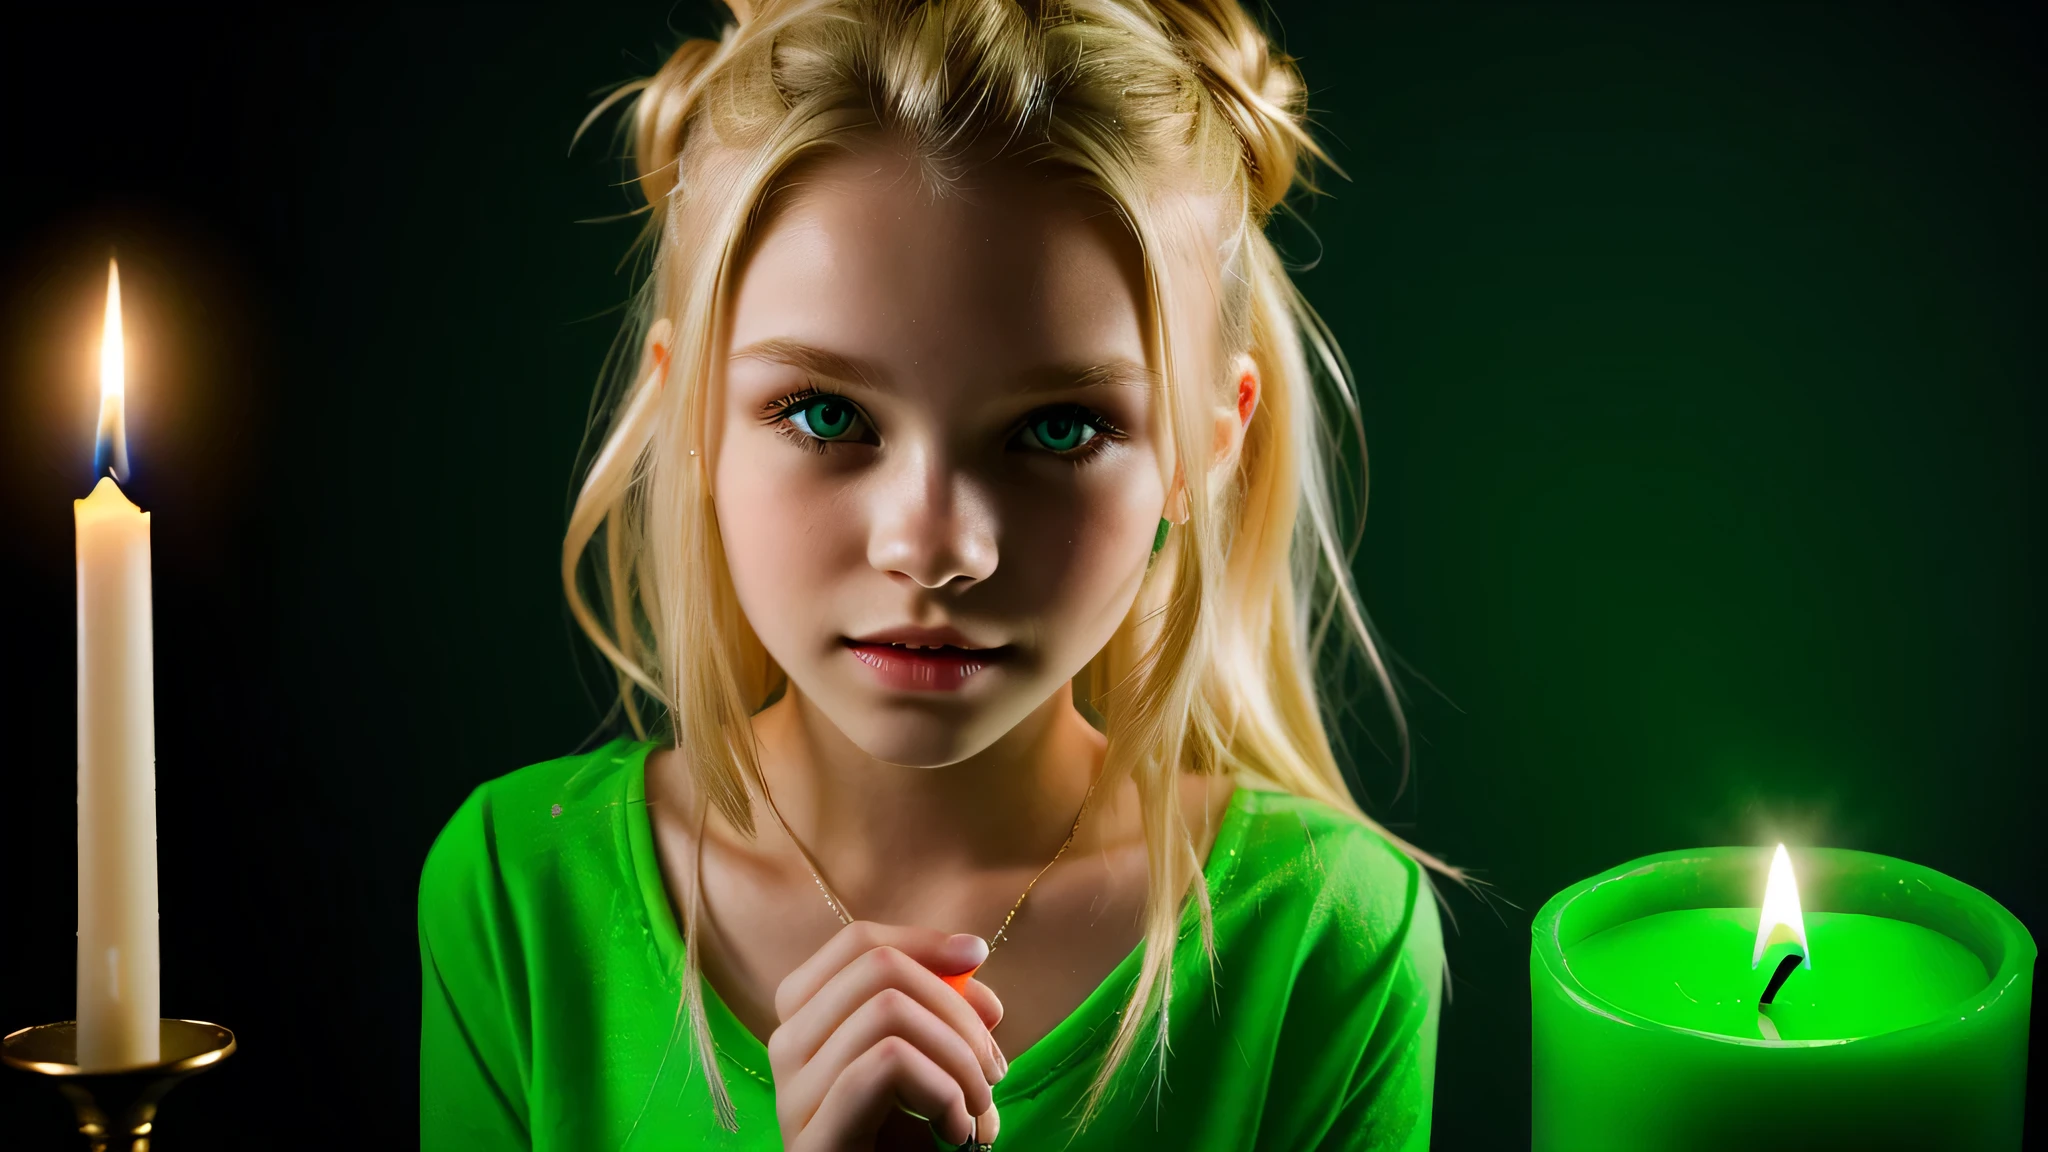 KIDS GIRL vampire blonde HAIR BUN green clothes. and candles, green light candles., GREEN BACKGROUND banished of sin